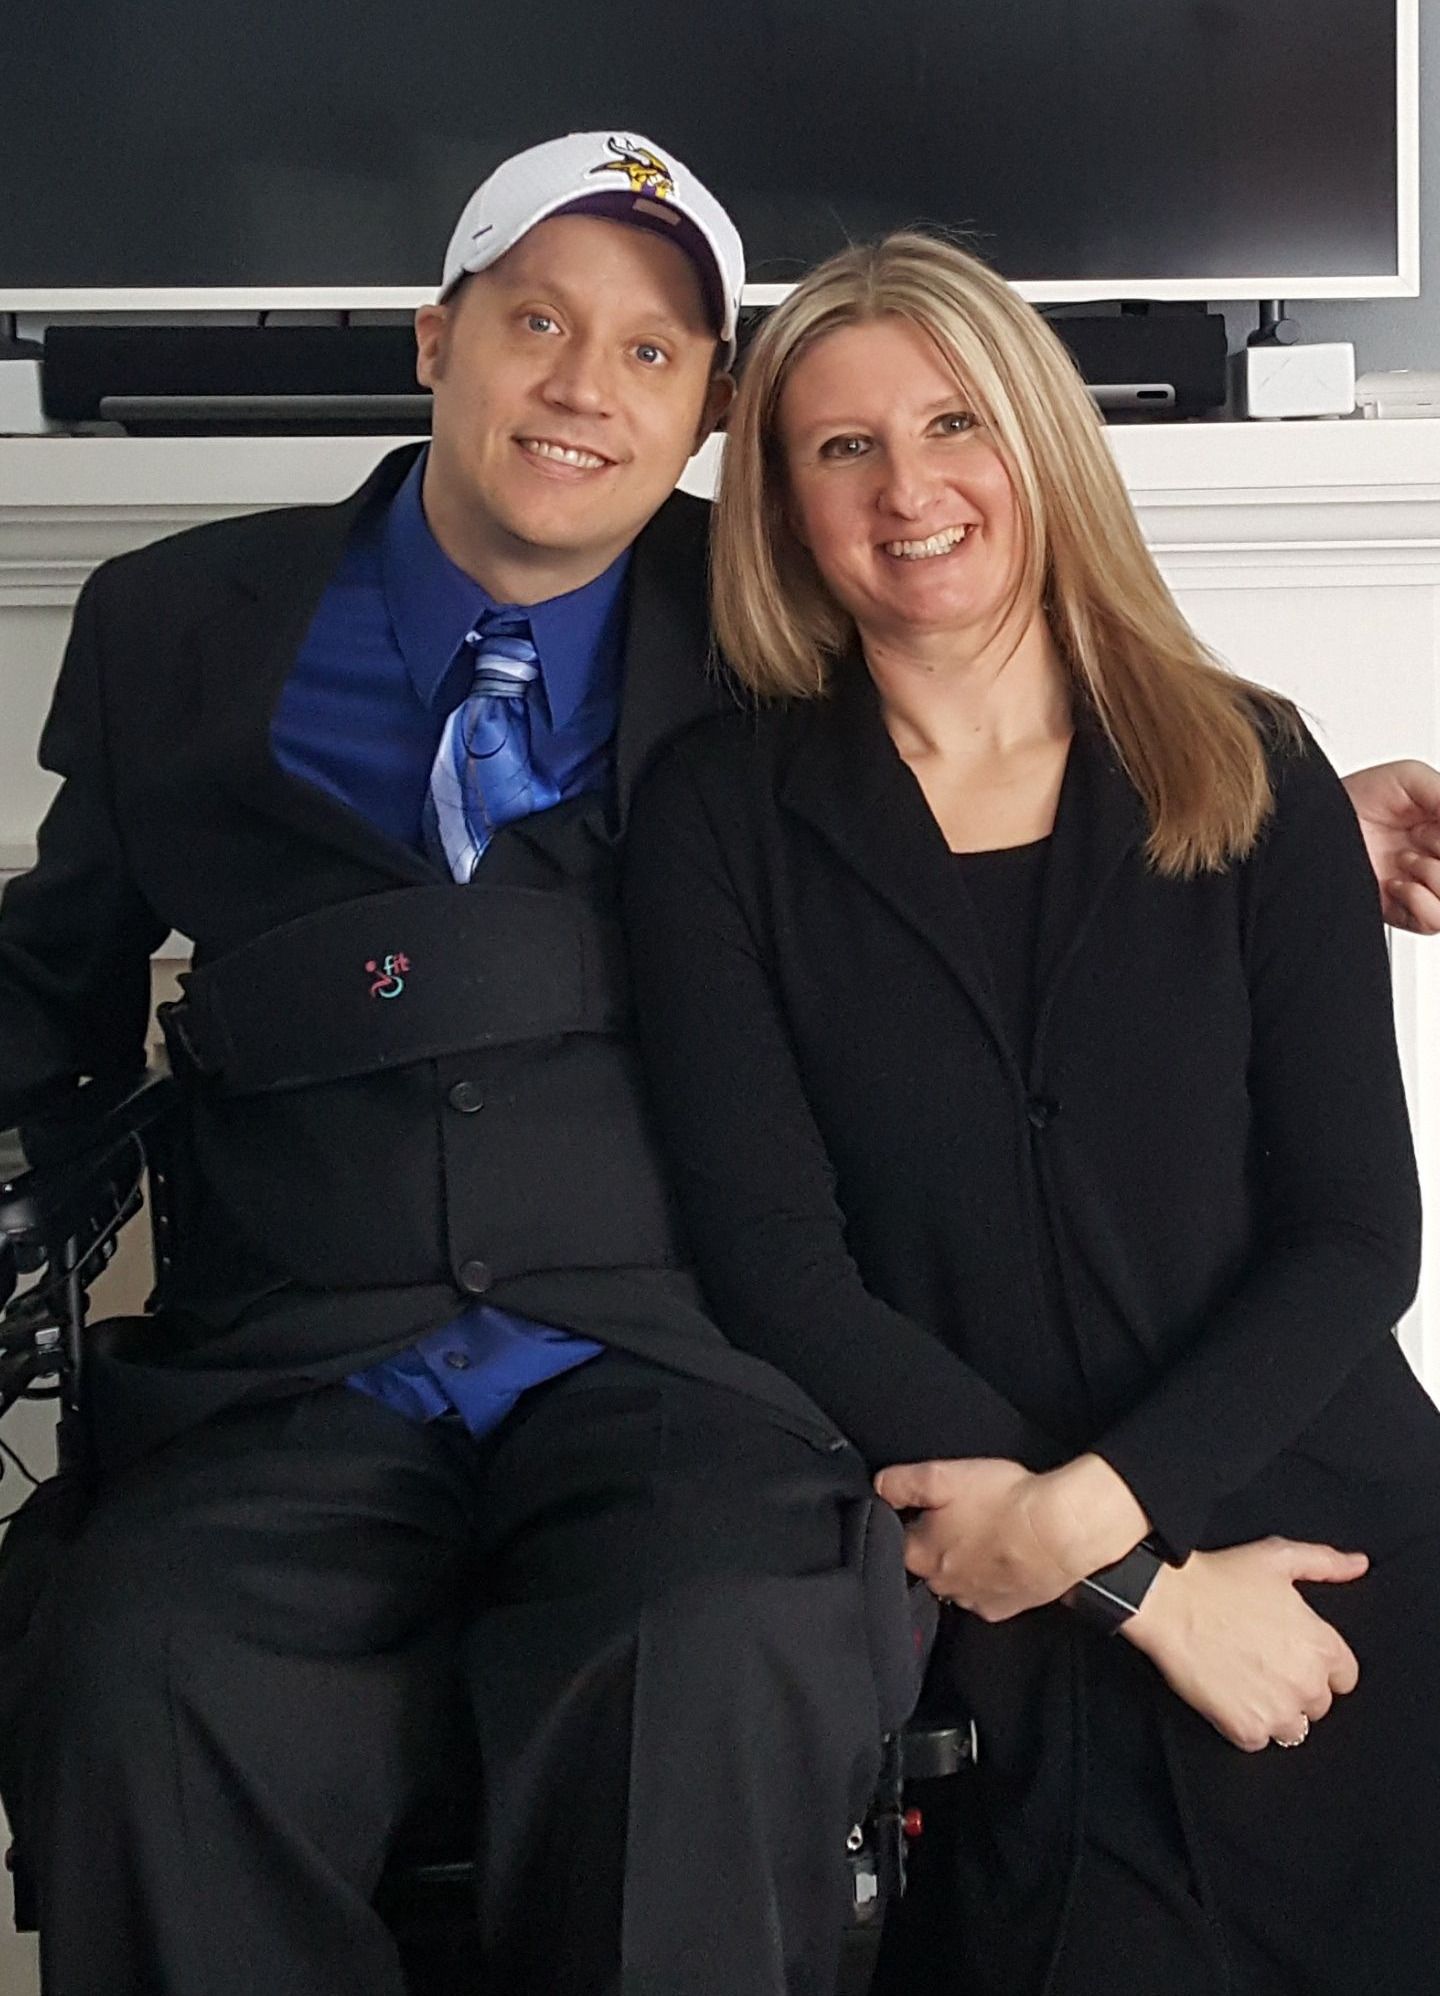 Chris Olson is pictured with his wife, Stacy